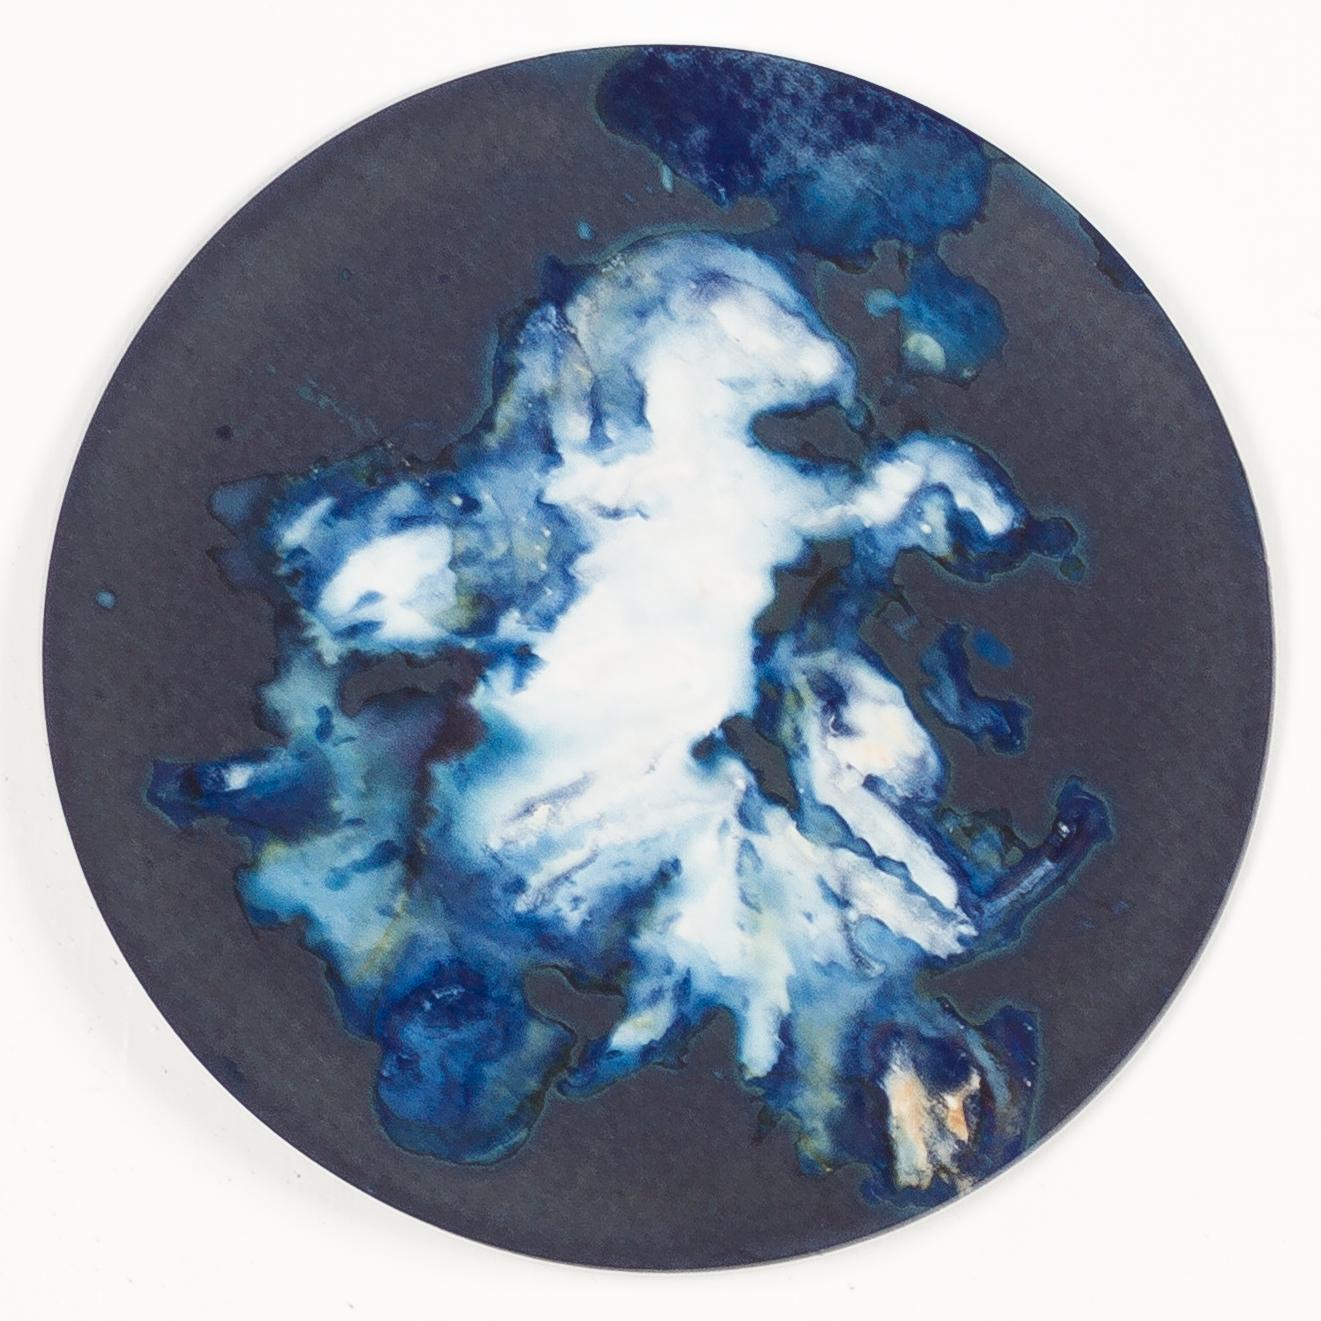 Algas 11, 22 y 67. Cyanotype photograhs mounted in high resistance glass dish For Sale 2